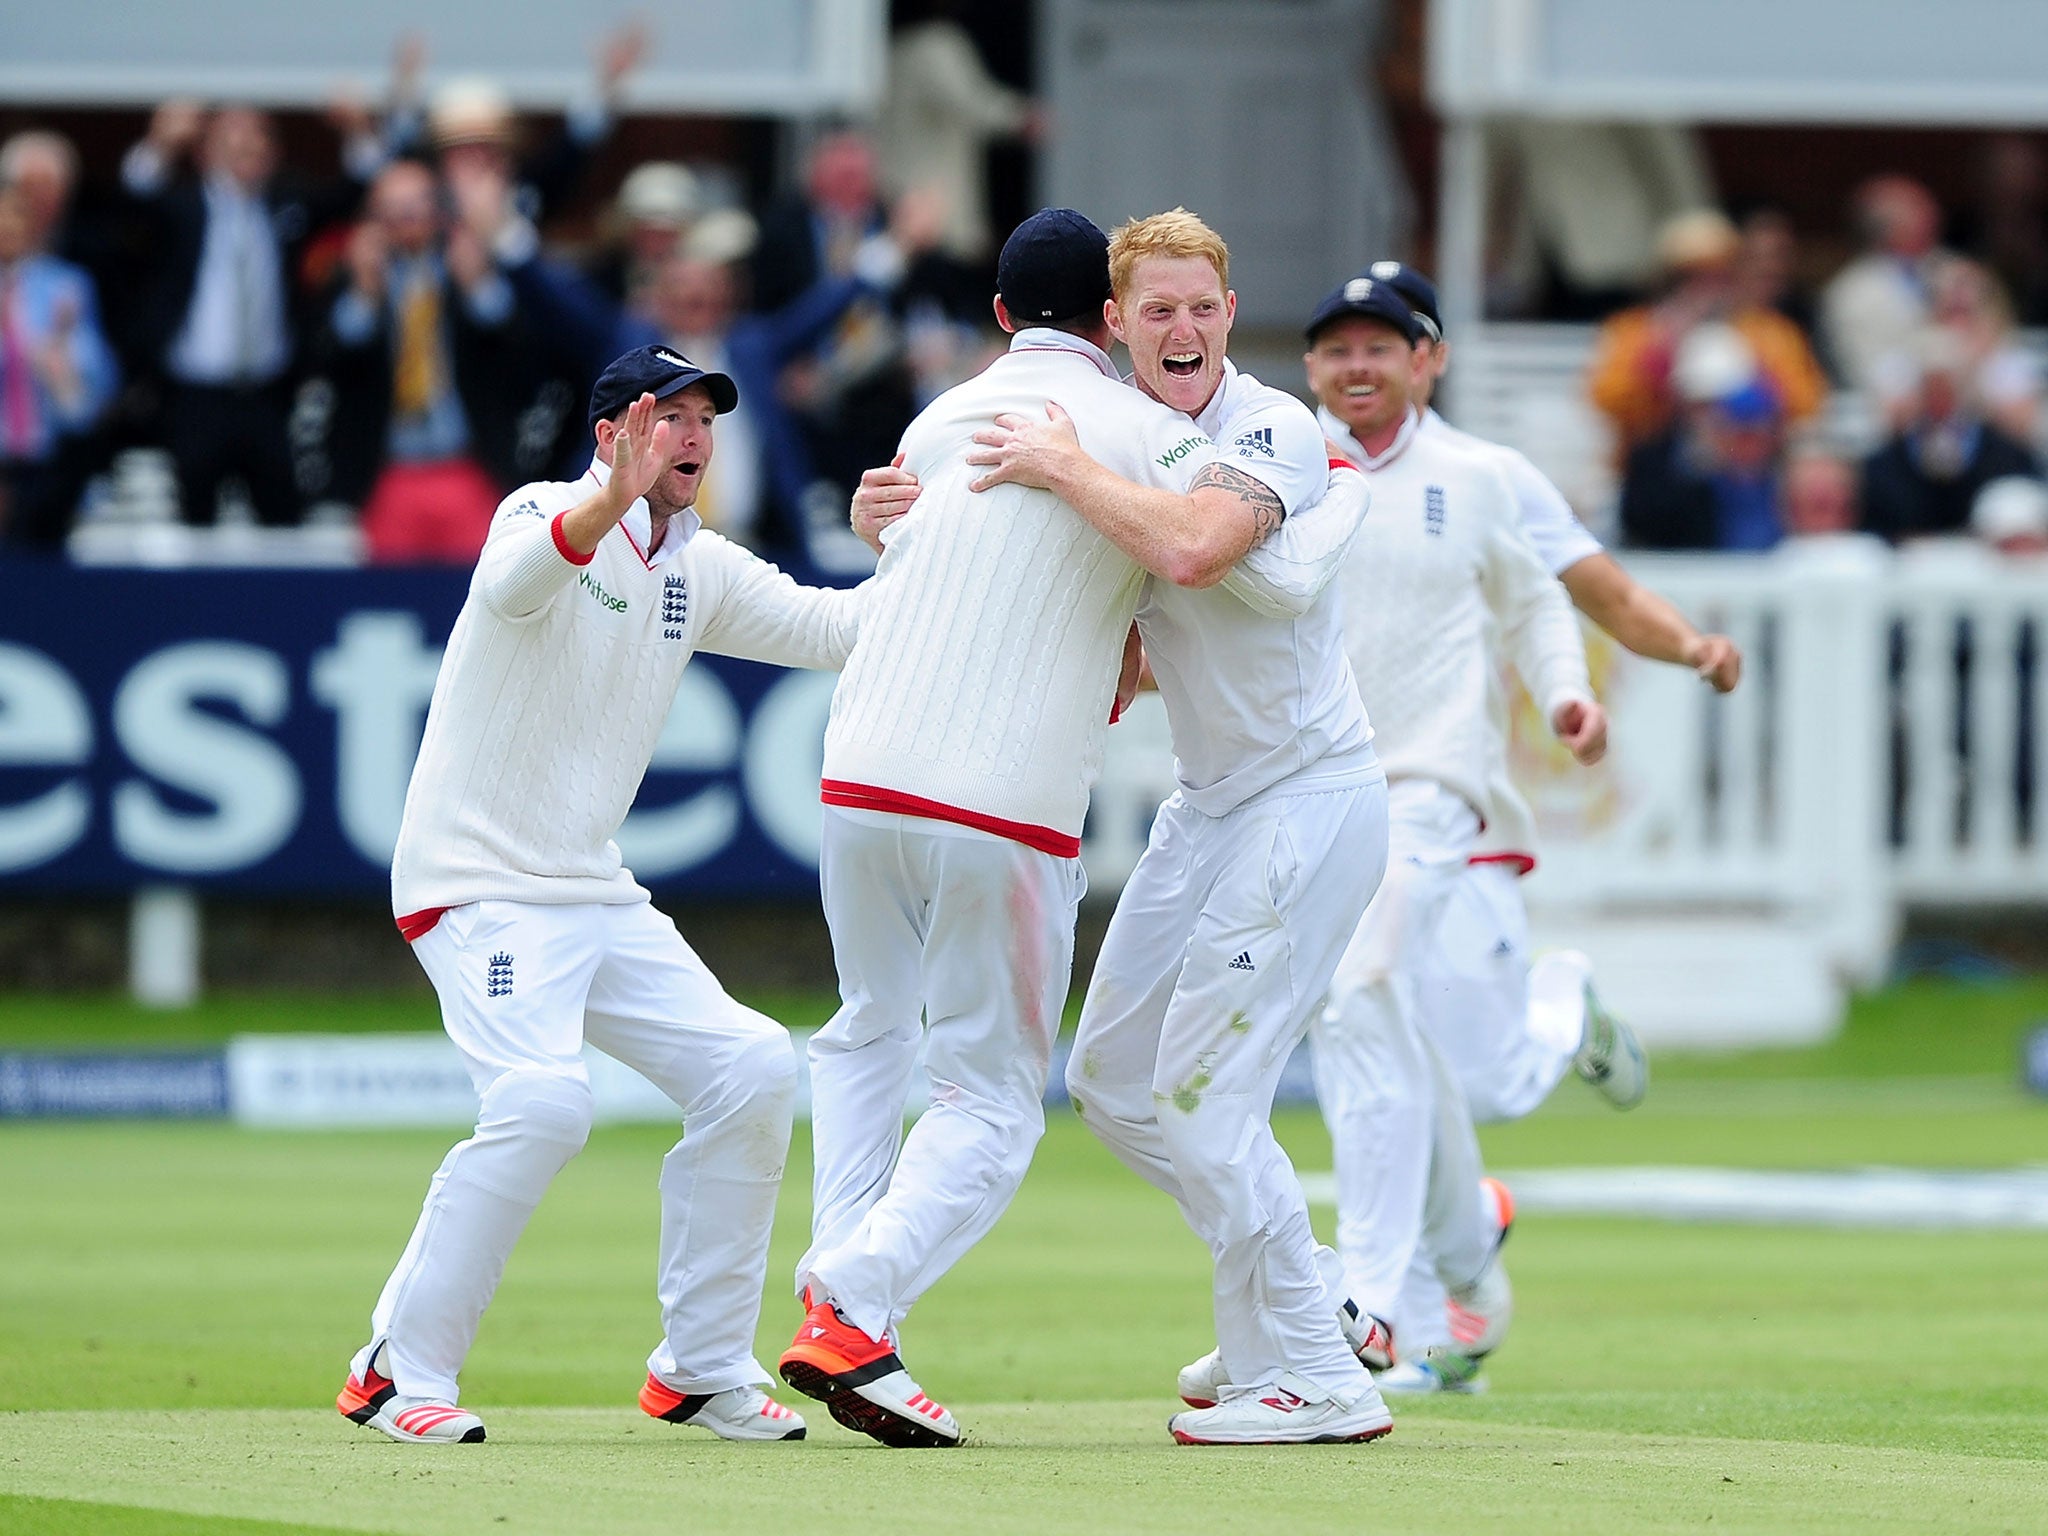 Ben Stokes celebrates with his team mates after bowling Brendon McCullum